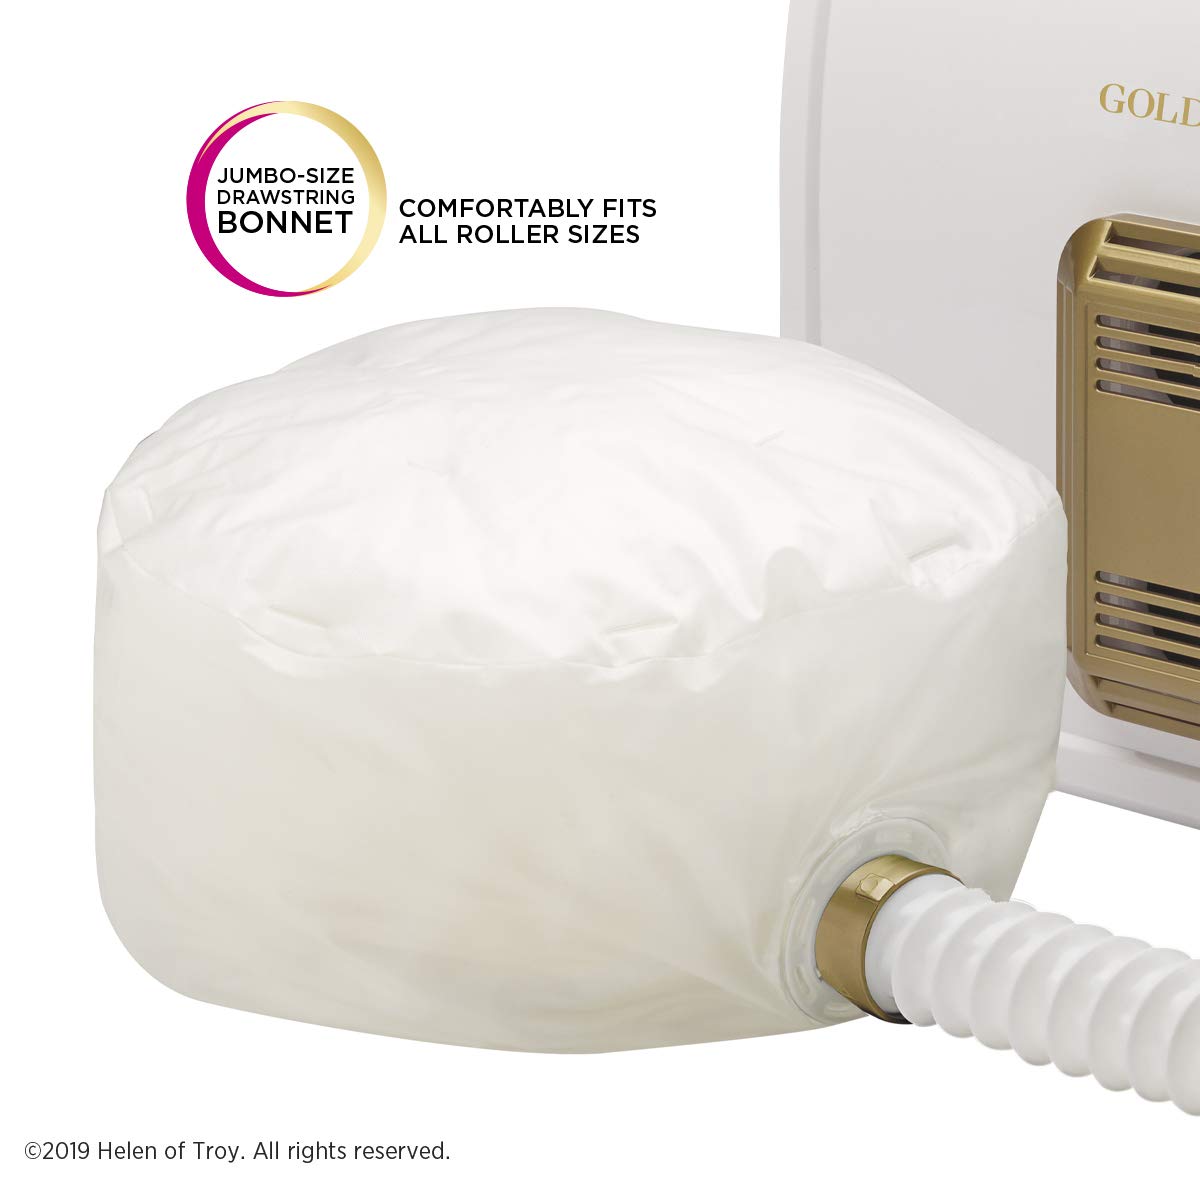 Gold N Hot Gold 'N Hot Professional Ionic Soft Bonnet Hair Dryer | Reduce Frizz for Natural, Healthy-Looking Hair